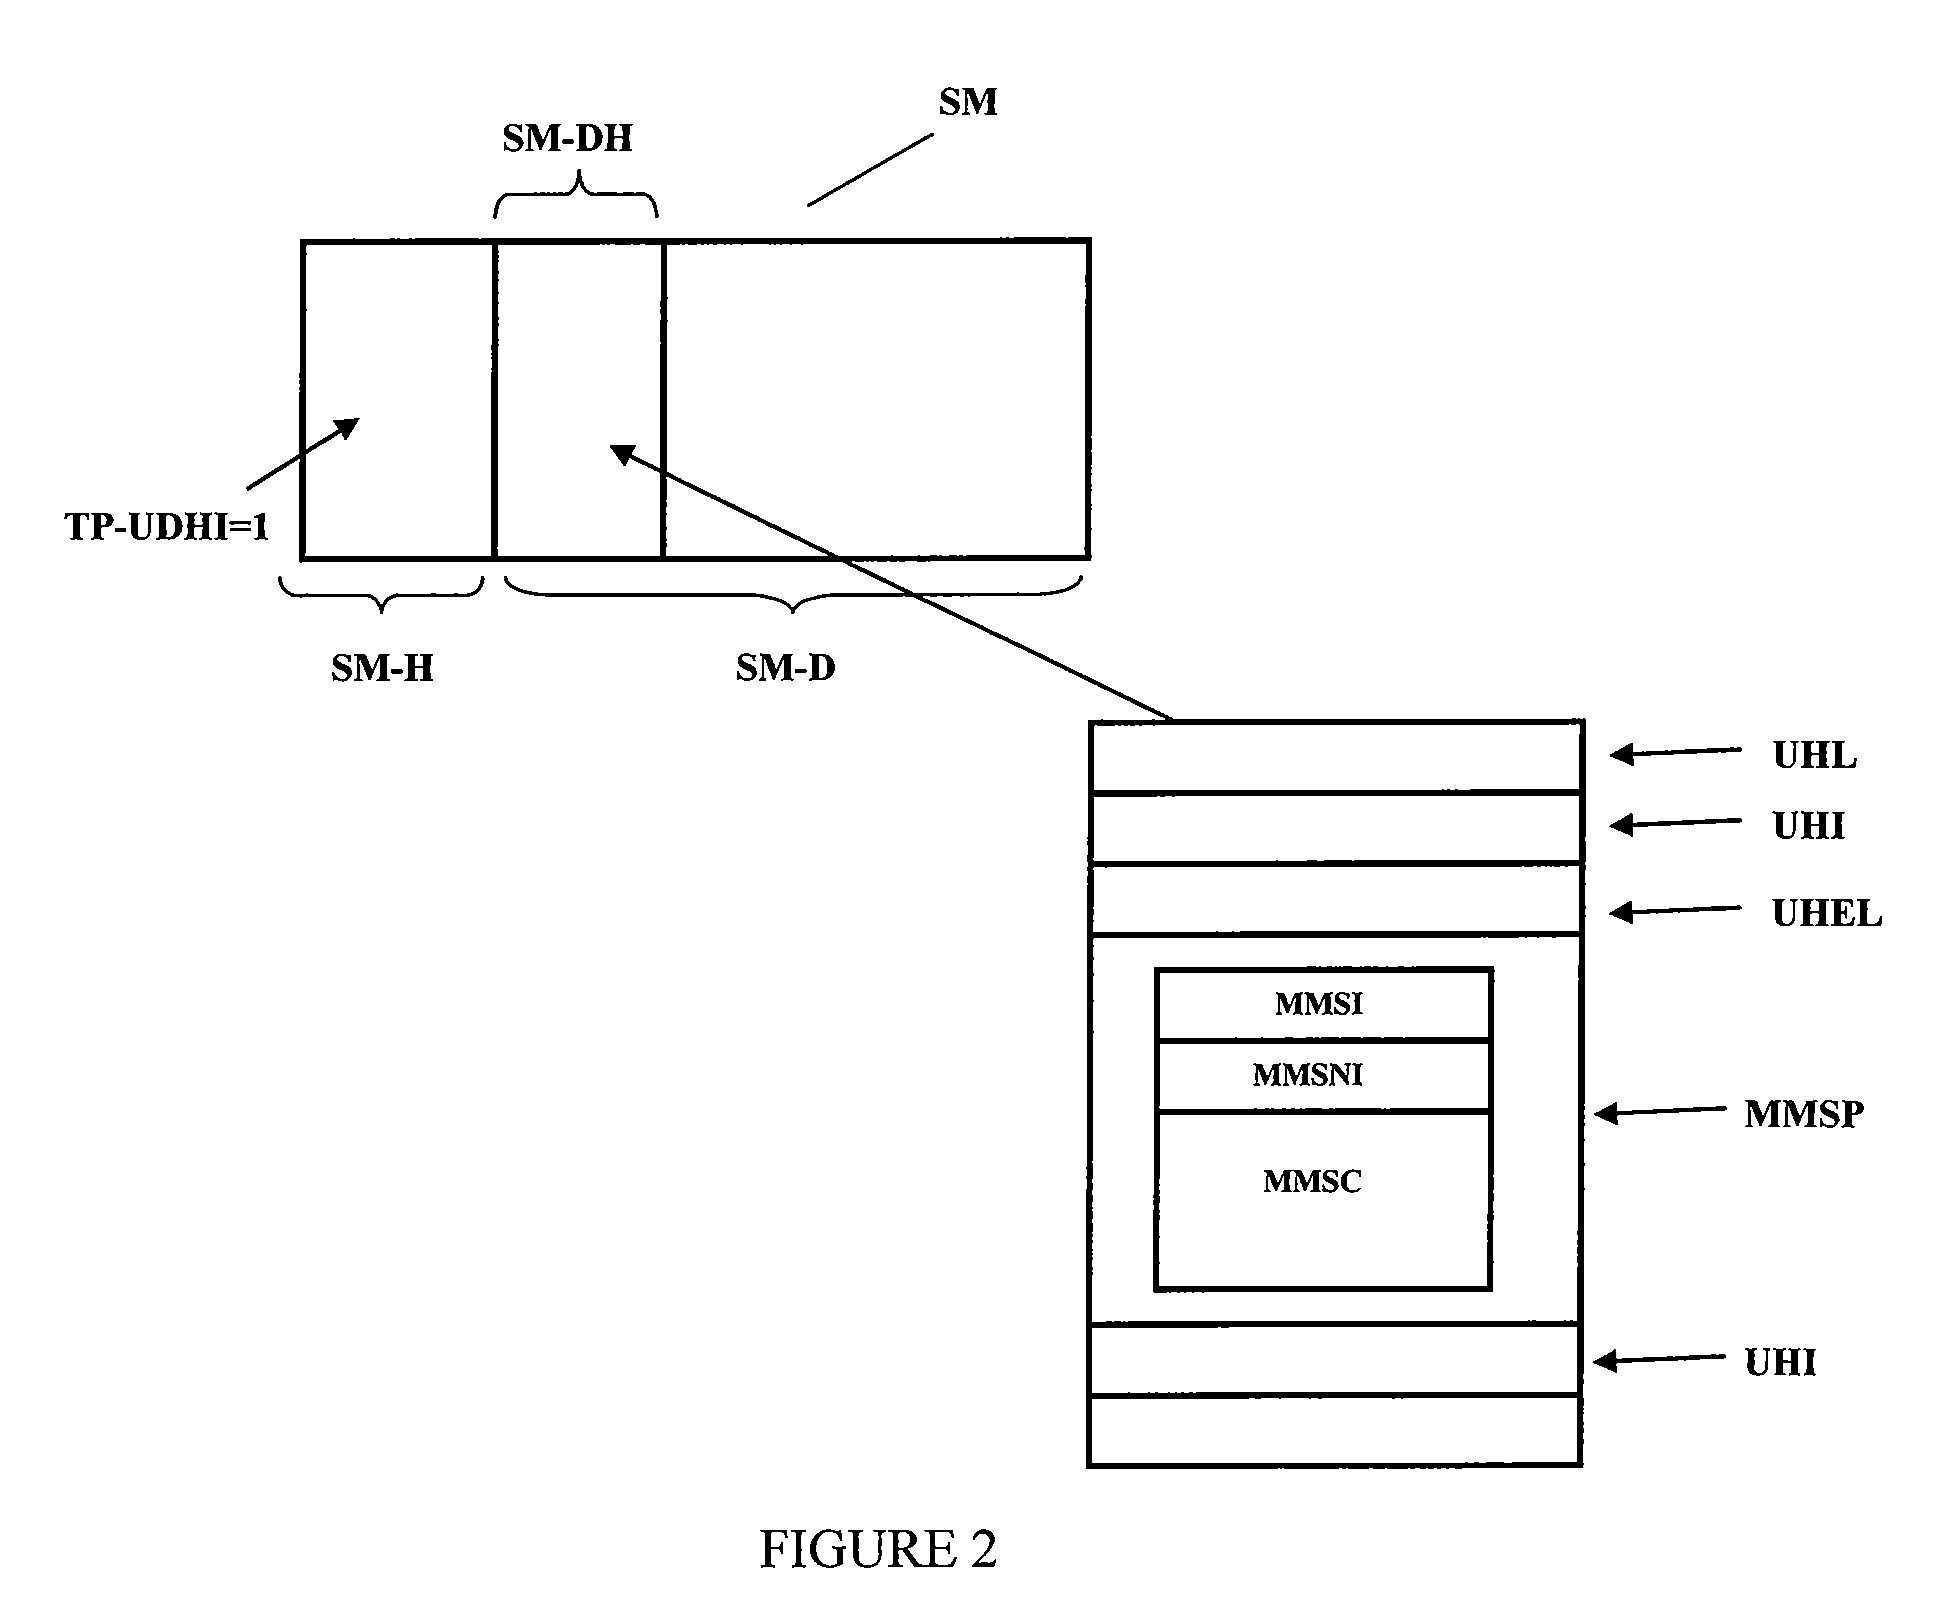 Method for transmitting messages in a telecommunications network